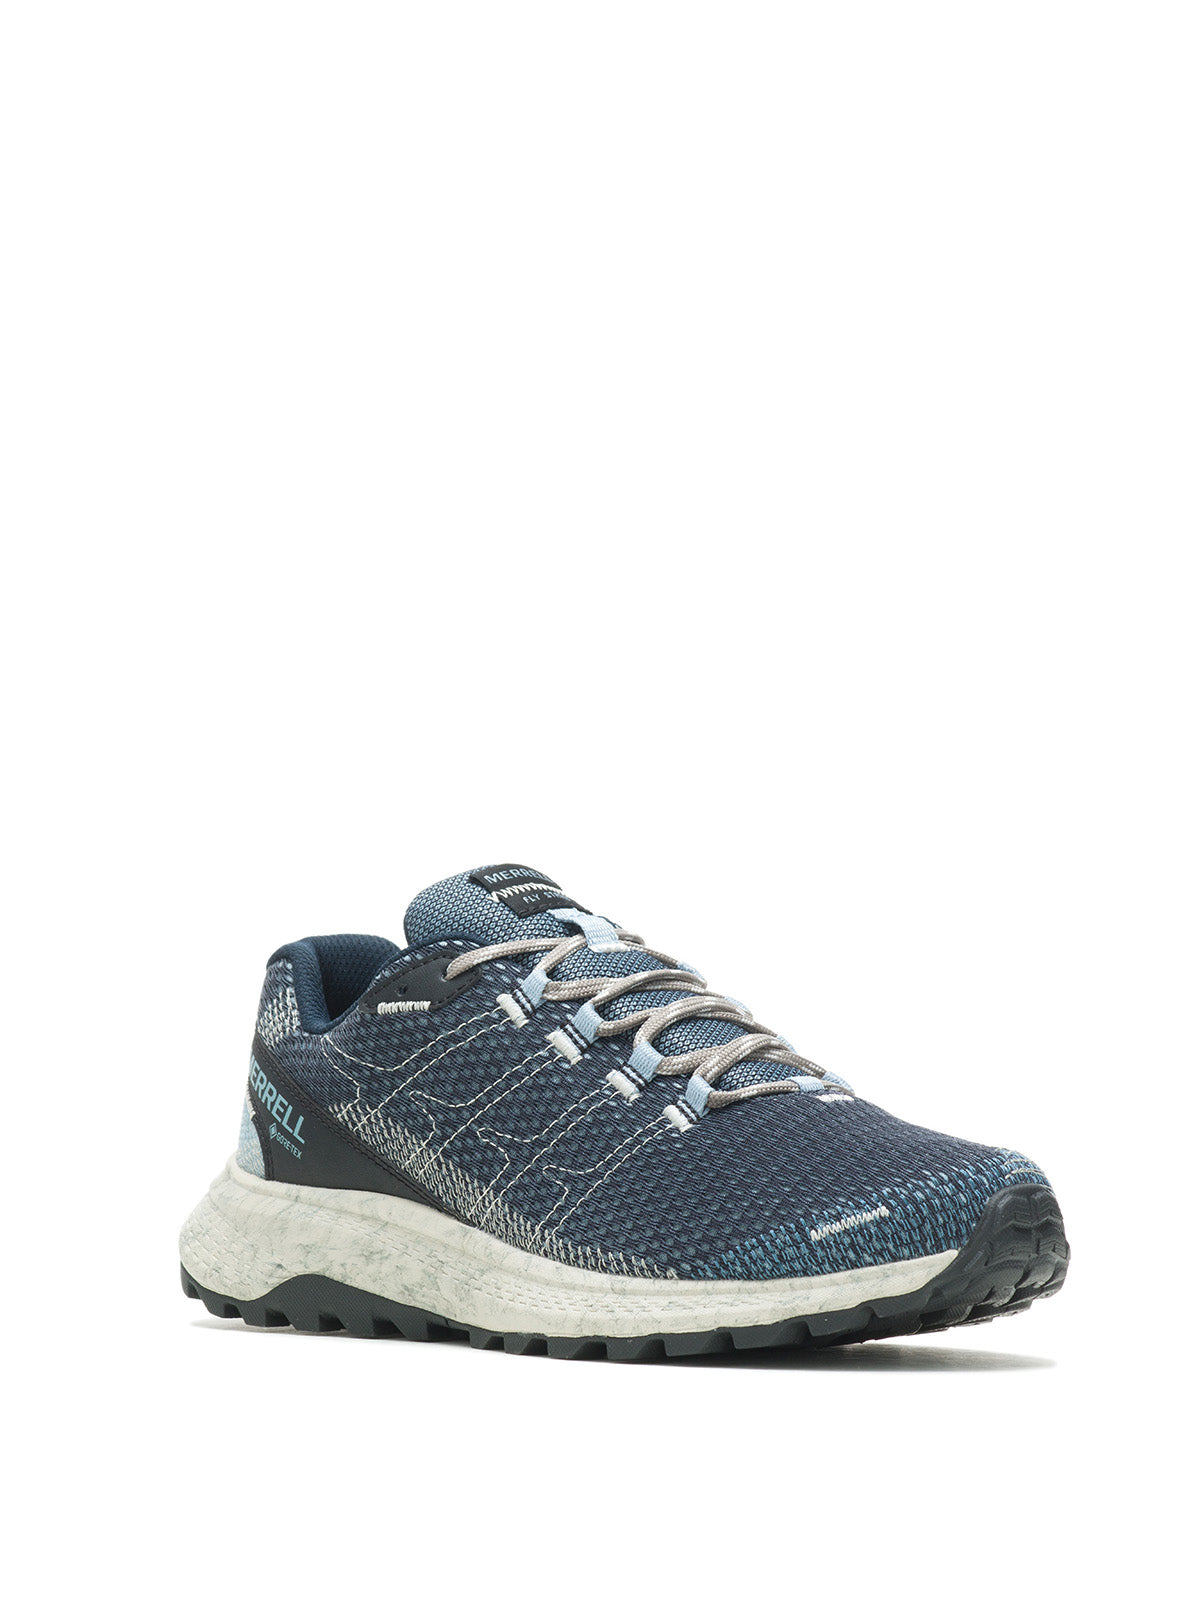 Chaussures pour femme Fly-Strike GORE-TEX